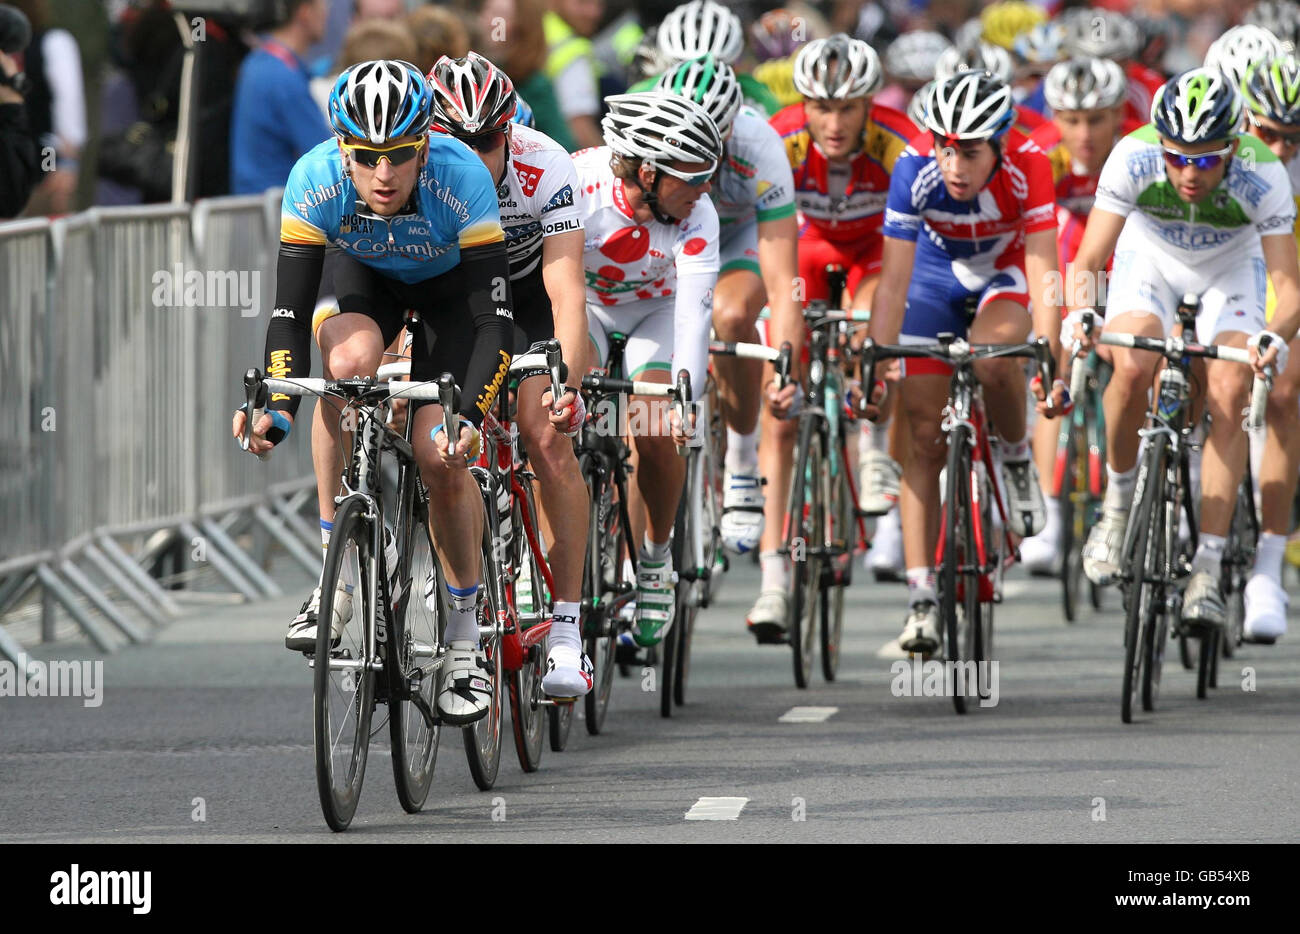 Cycling - Tour of Britain - Stage Eight - Blackpool to Liverpool. Great Britain's Bradley Wiggins leads the pack during Stage Eight of The Tour of Britain in Liverpool. Stock Photo